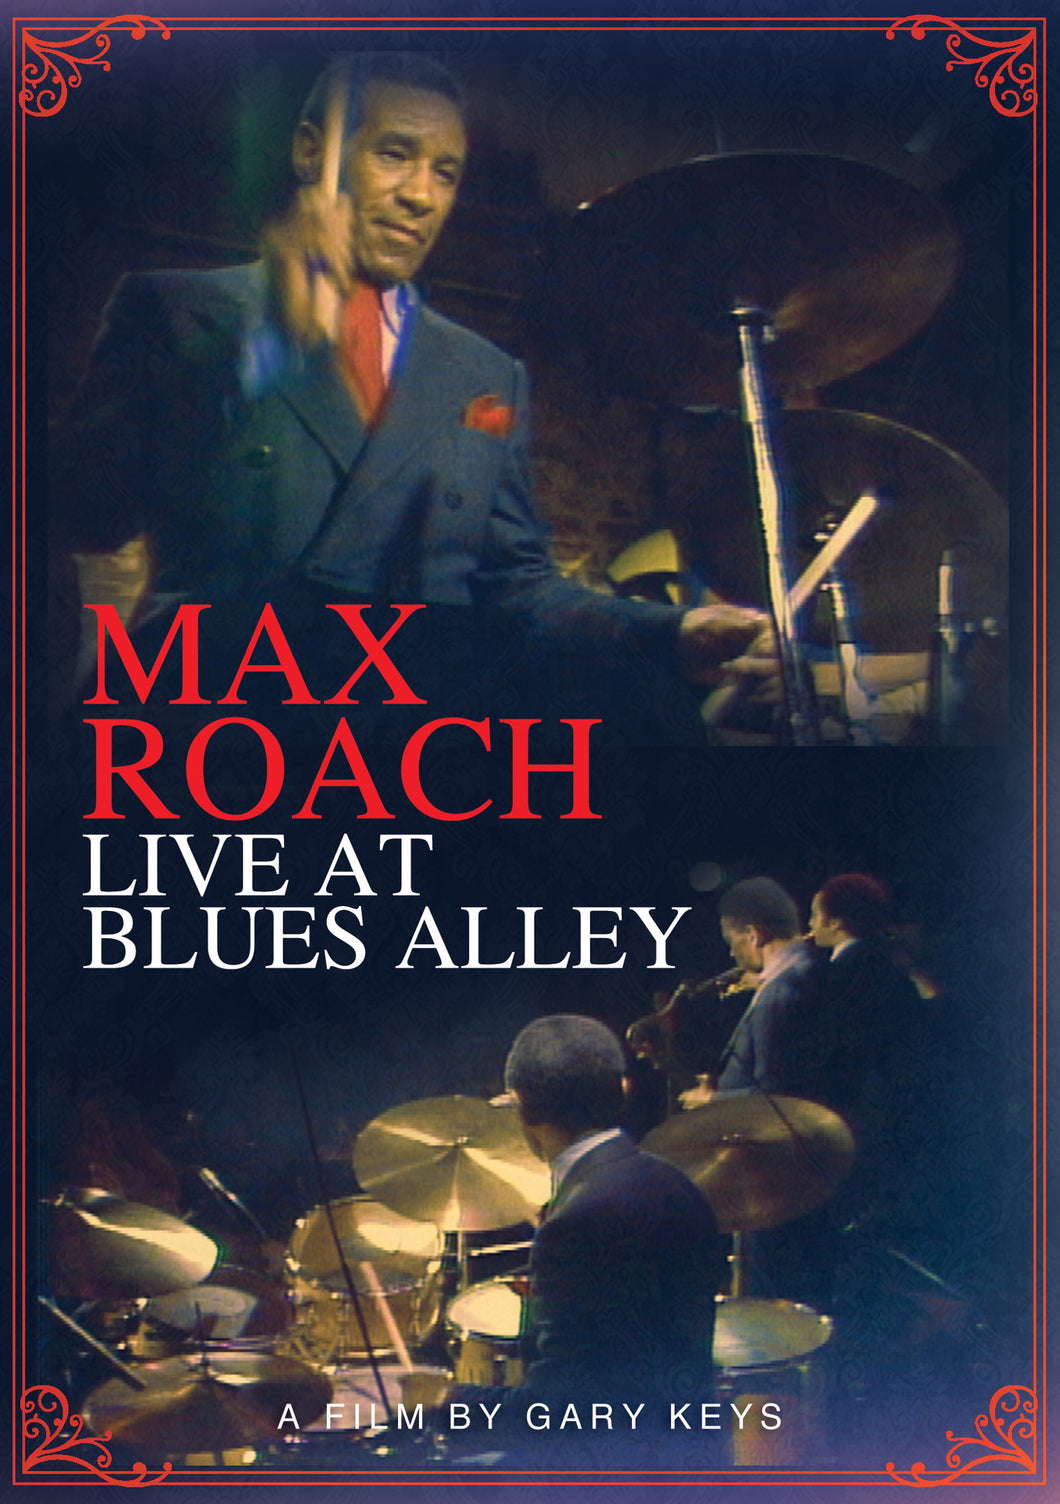 Max Roach - Live At Blues Alley (DVD)